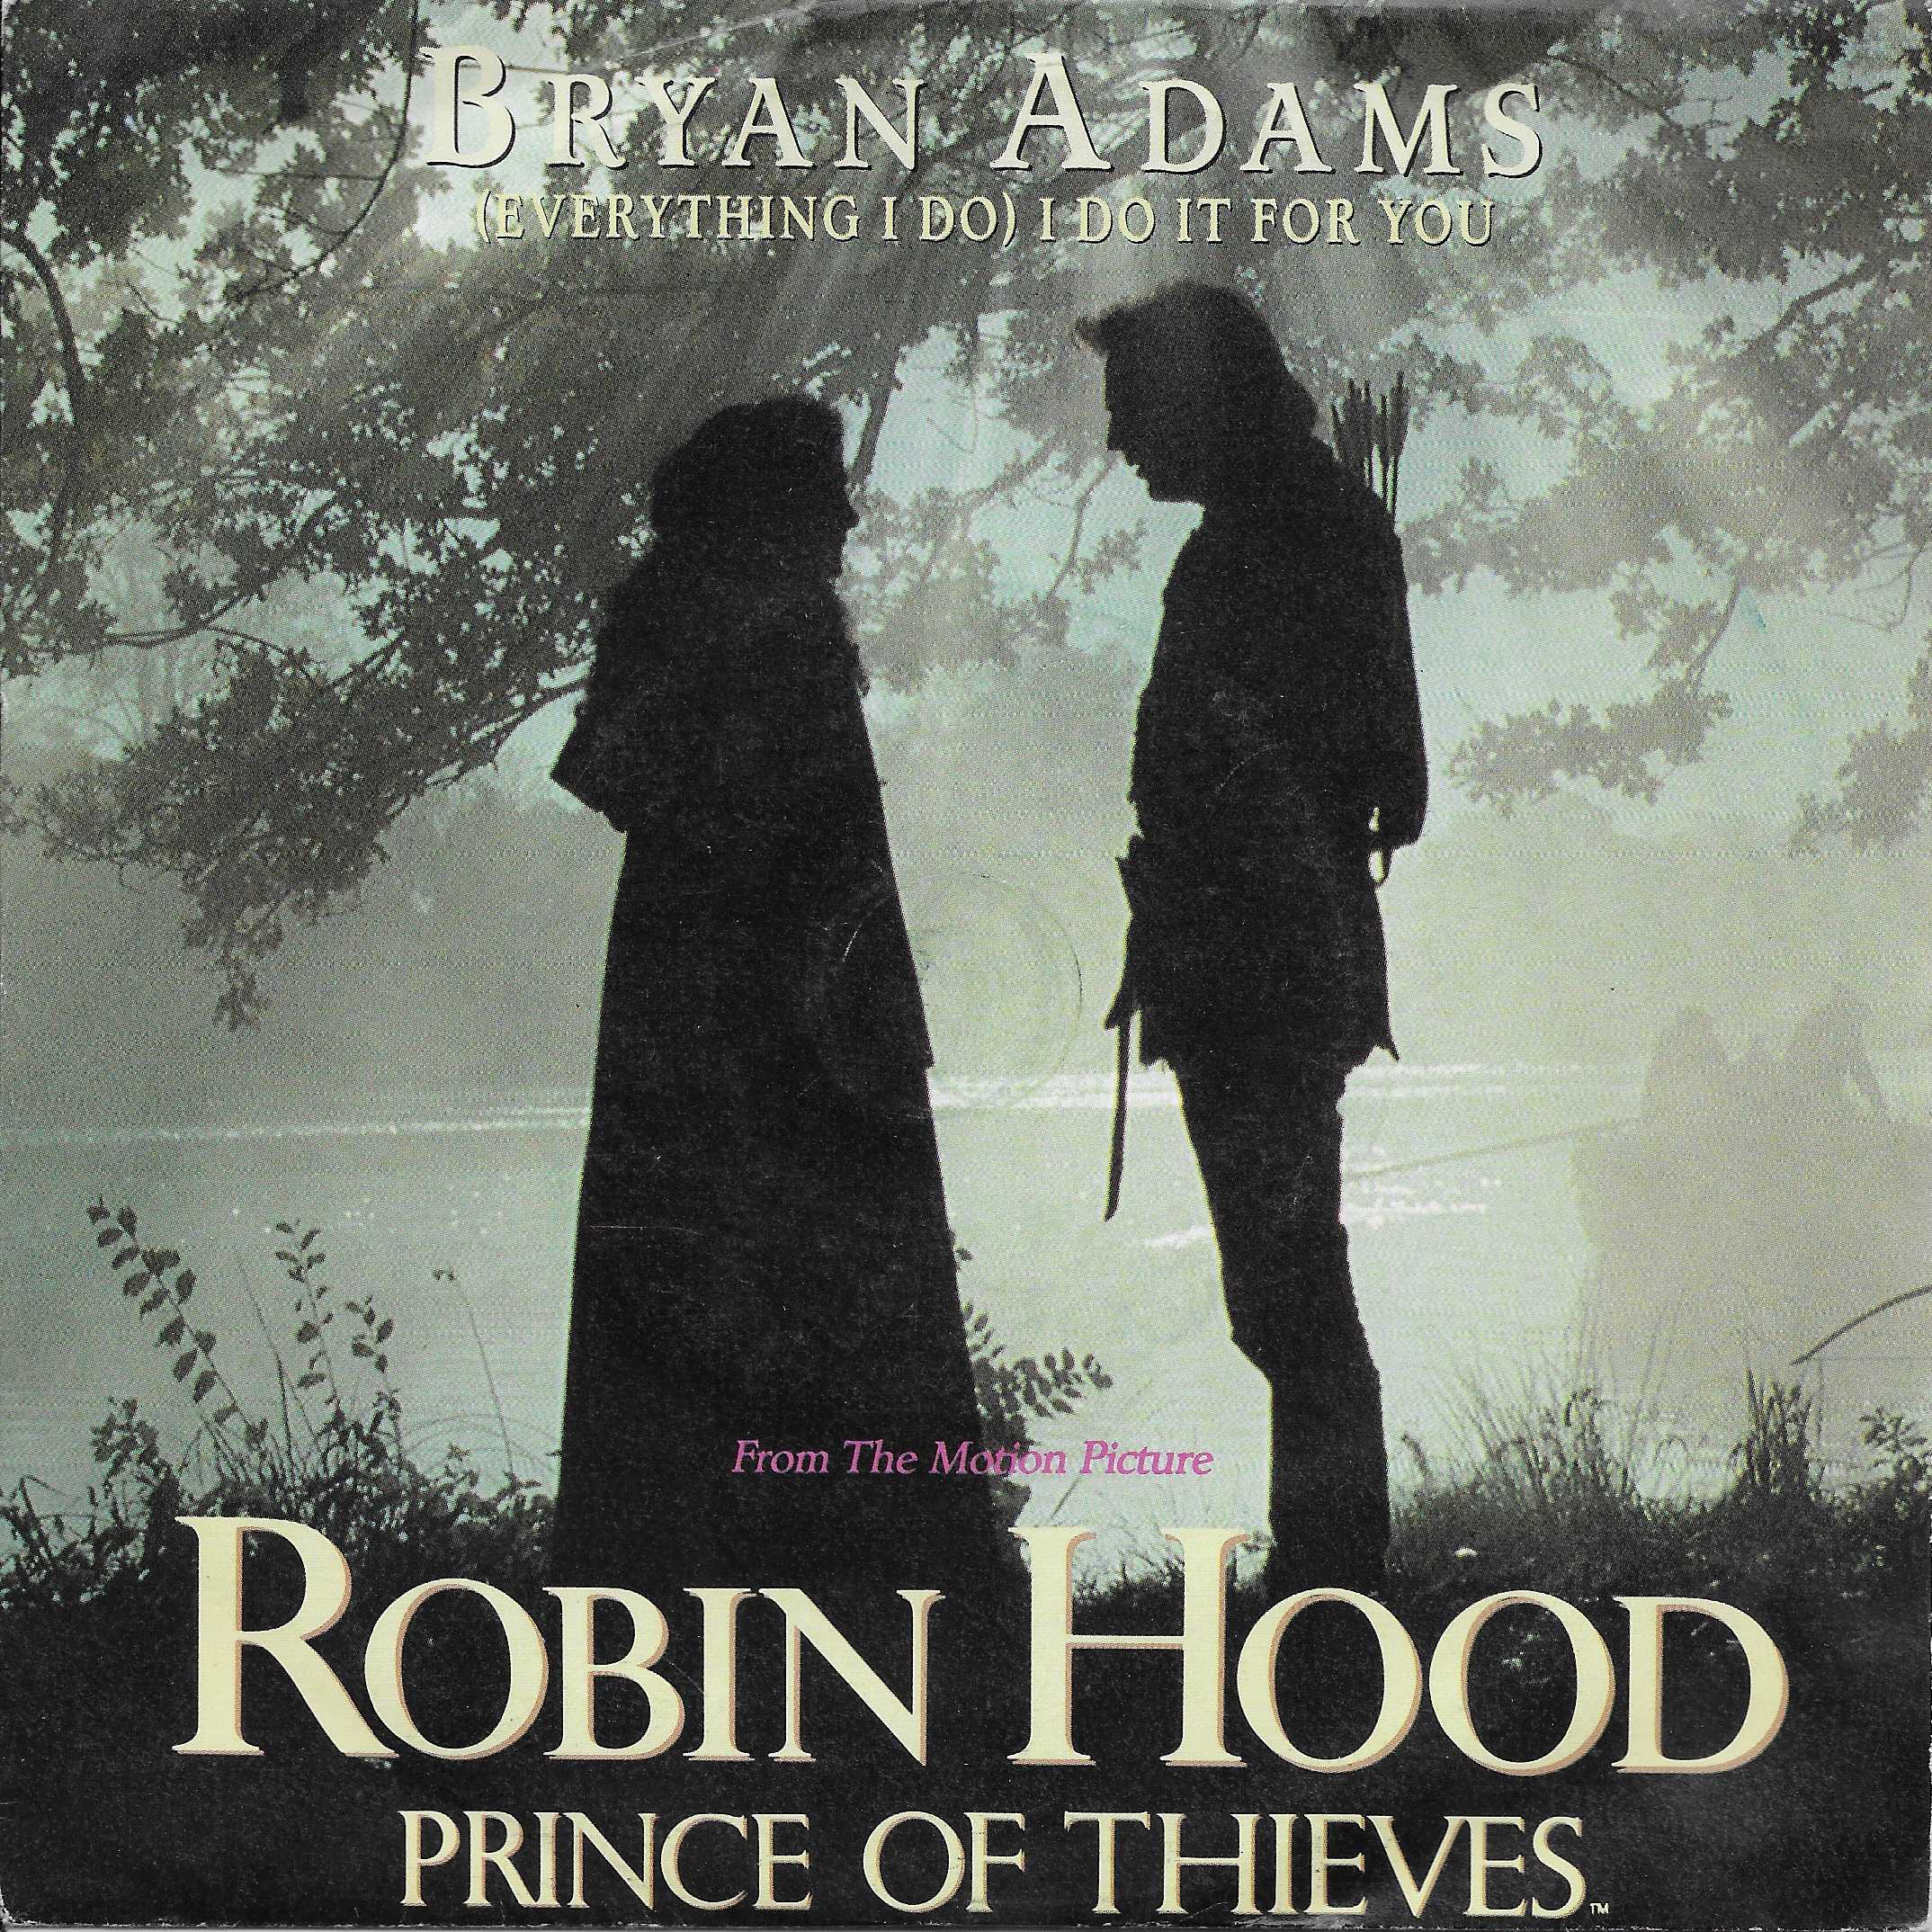 Picture of AM 789 (Everything I do) I do it for you (Robin Hood: Prince of theives) by artist Brian Admas / R. J. Lange / Michael Kamen / J. Valance from ITV, Channel 4 and Channel 5 library